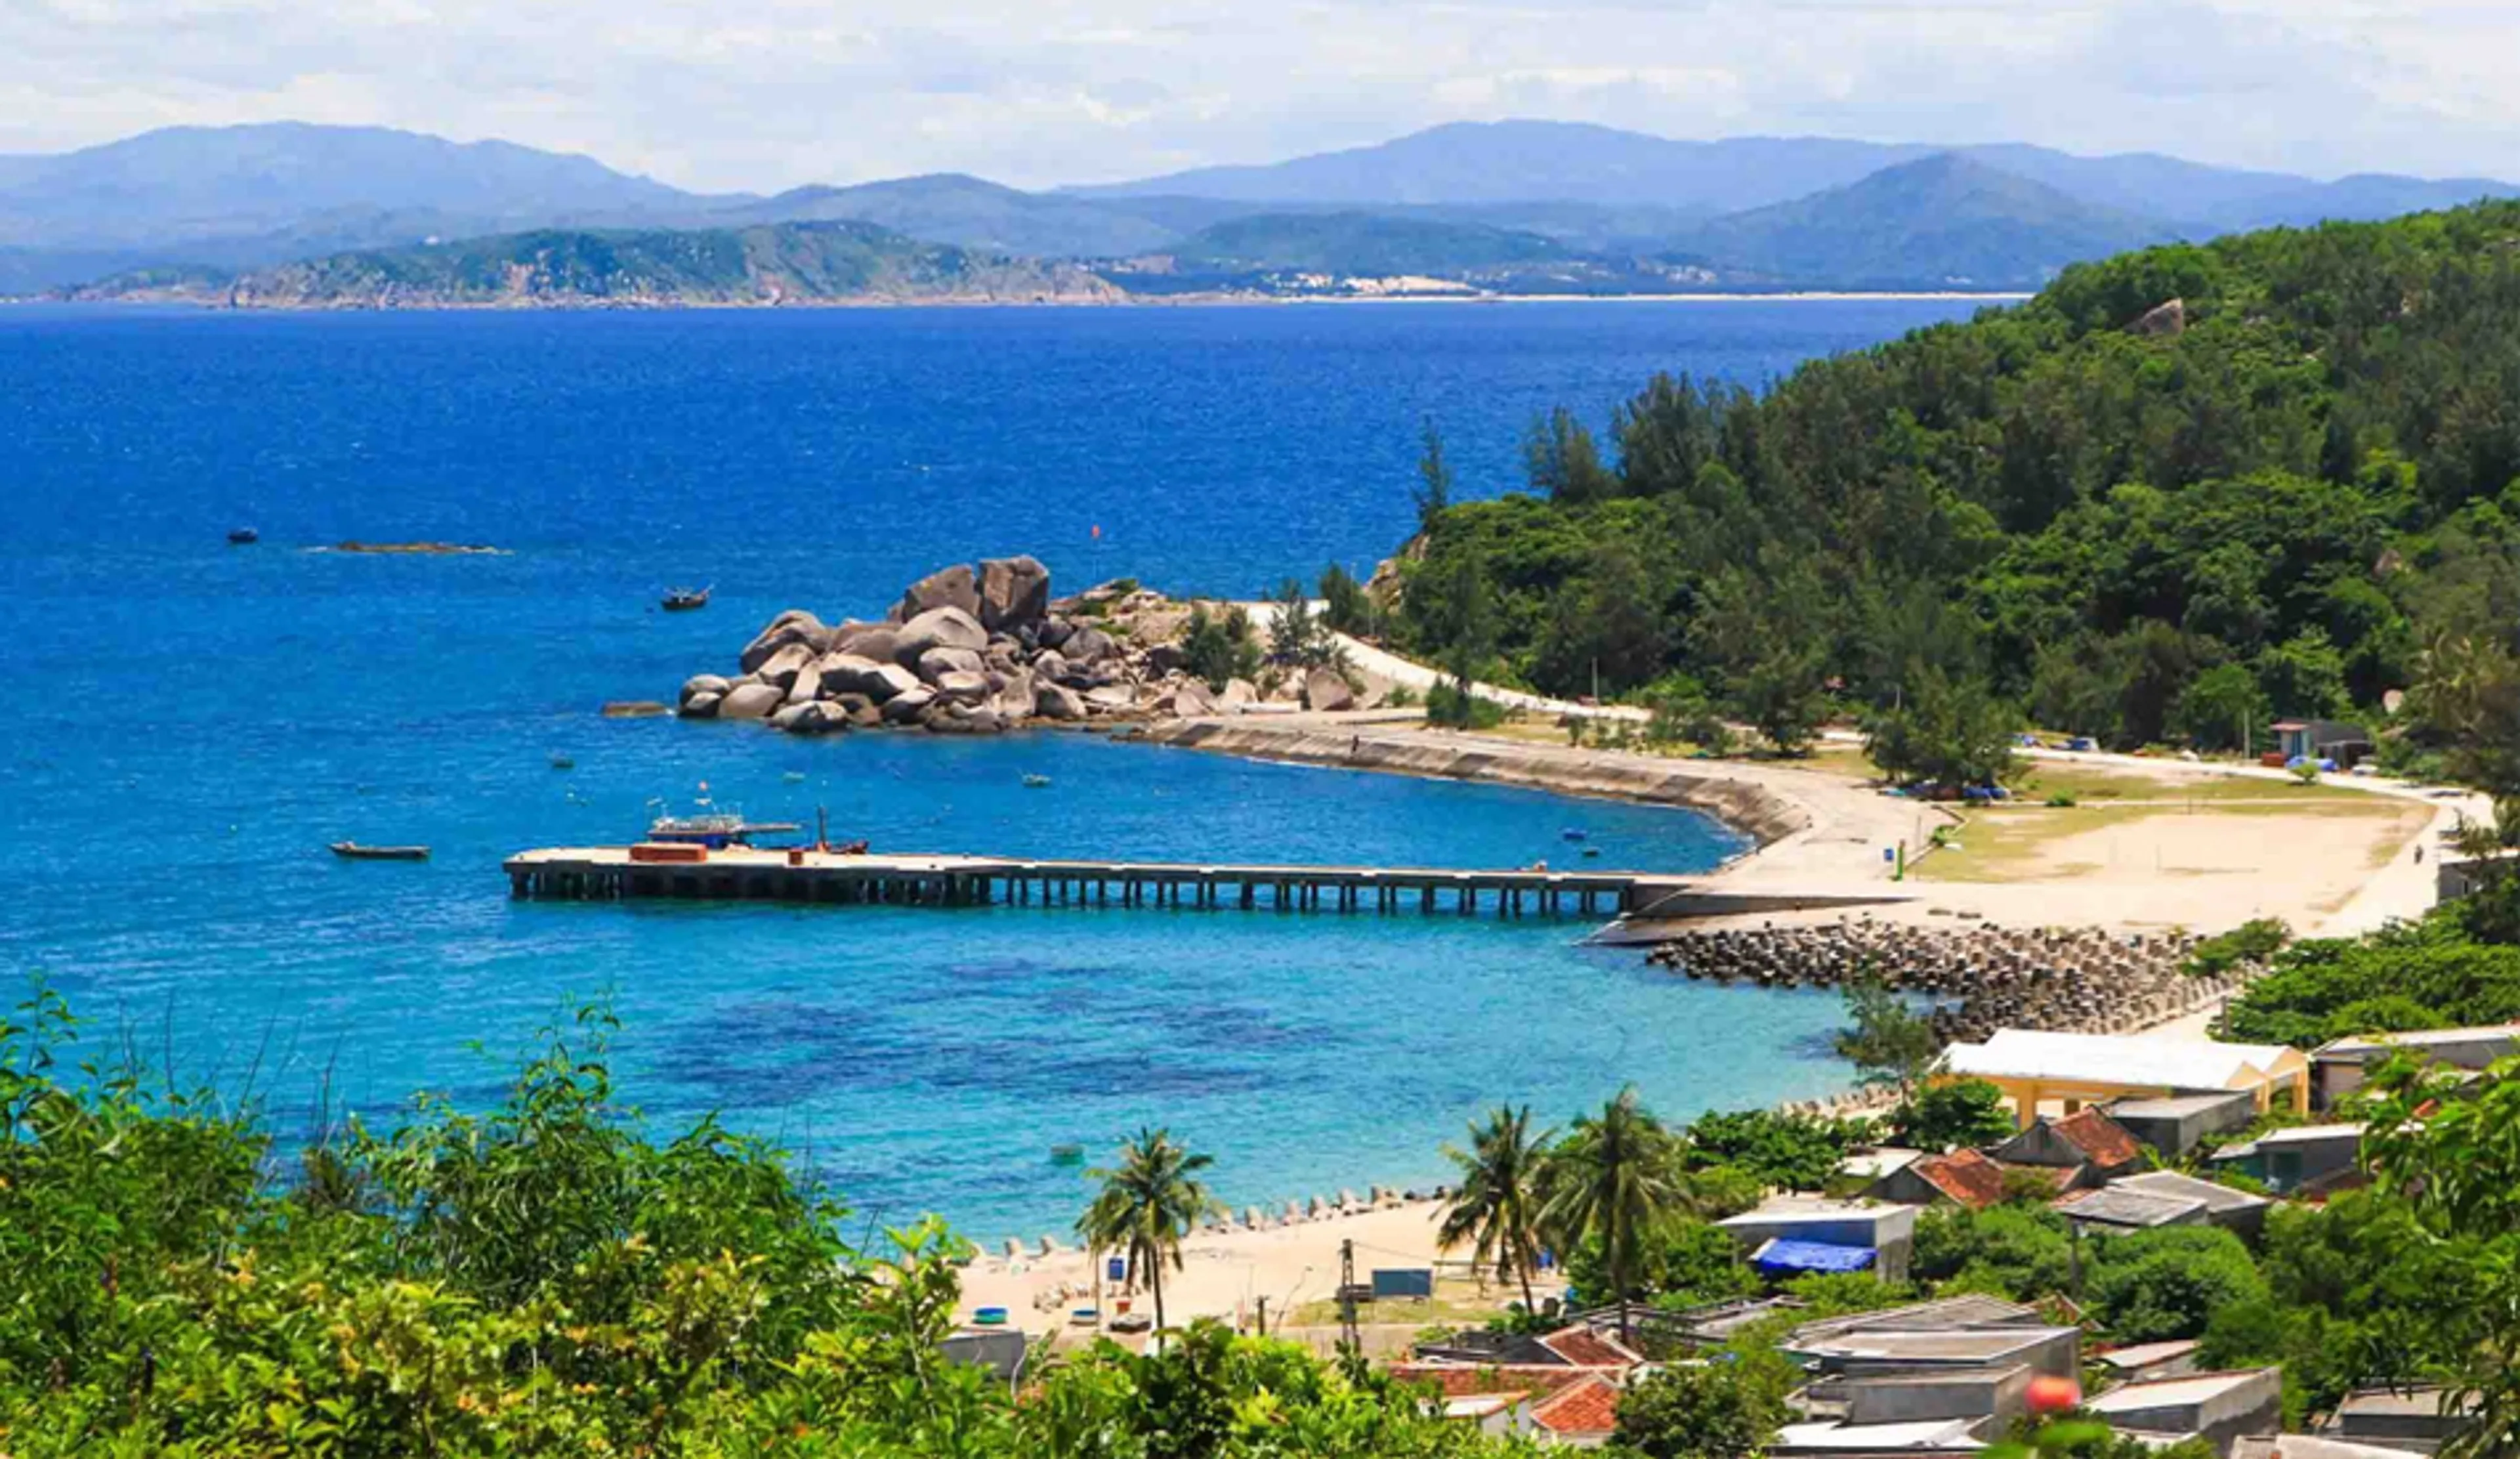 Places not to be missed when coming to Quy Nhon